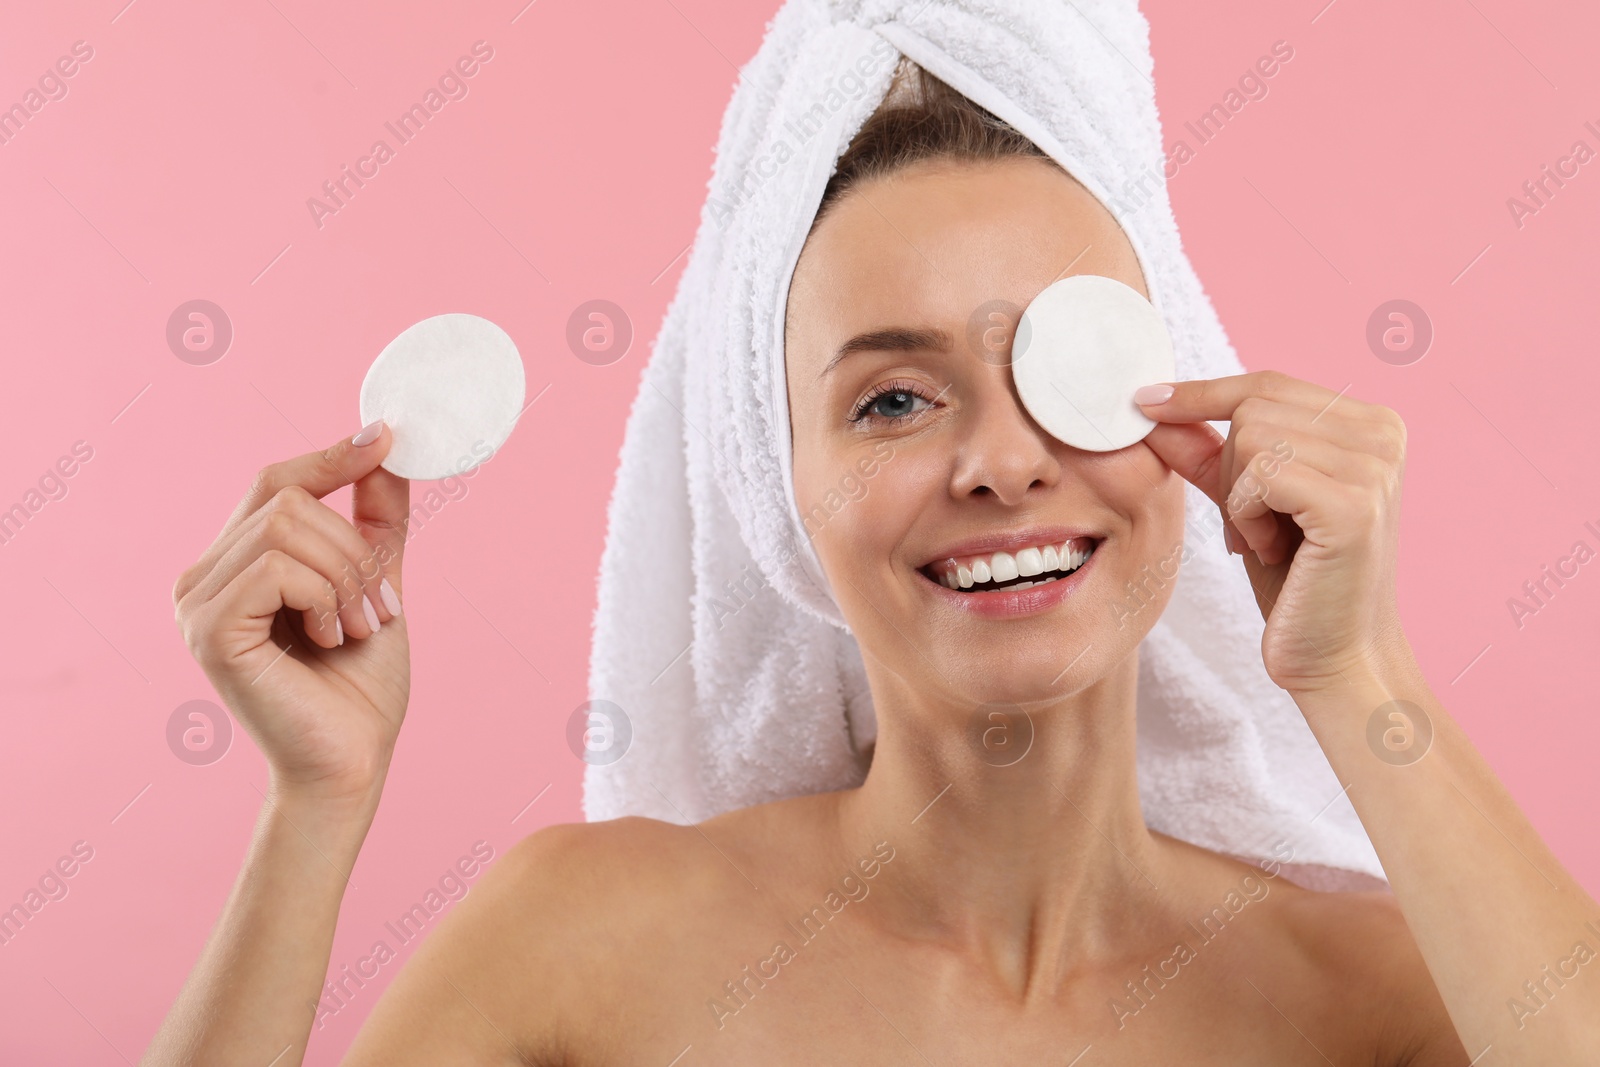 Photo of Smiling woman removing makeup with cotton pads on pink background